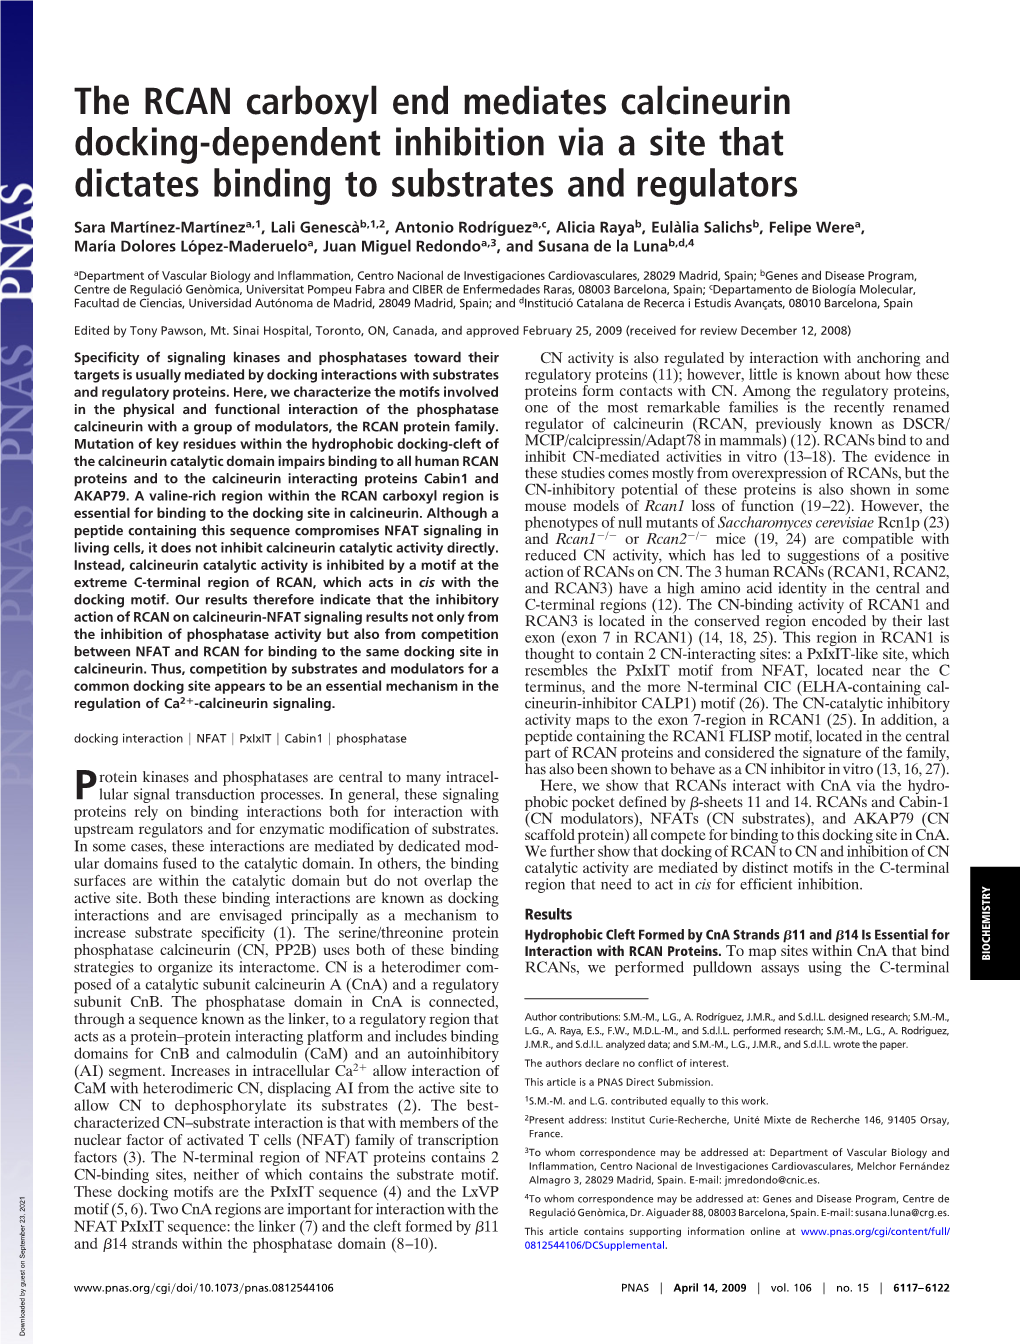 The RCAN Carboxyl End Mediates Calcineurin Docking-Dependent Inhibition Via a Site That Dictates Binding to Substrates and Regulators